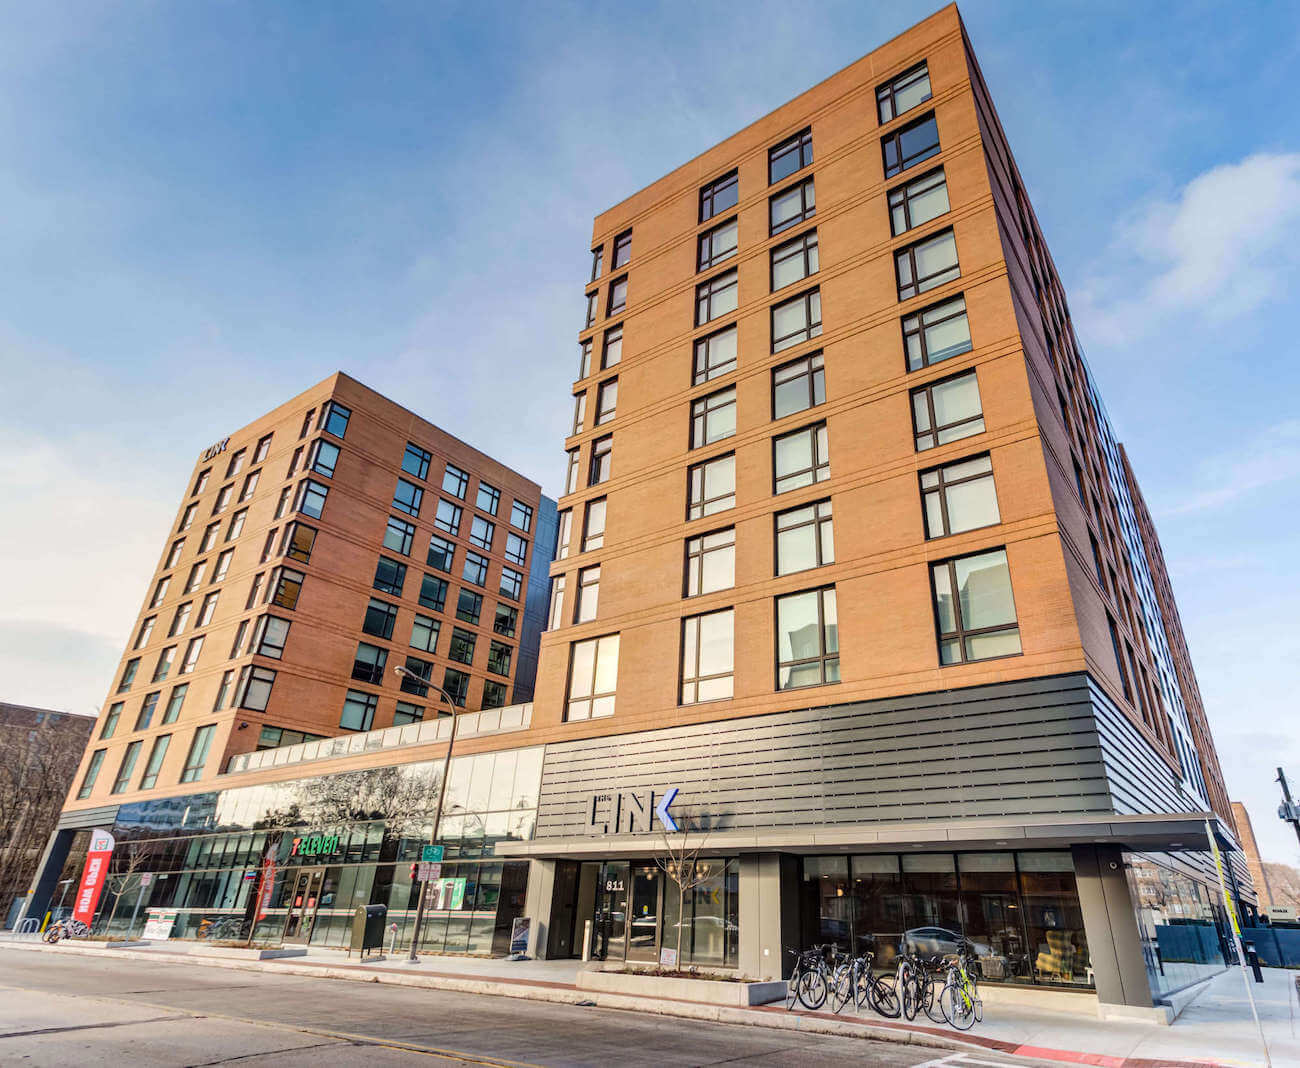 The Link Evanston is located just steps from Northwestern University campus